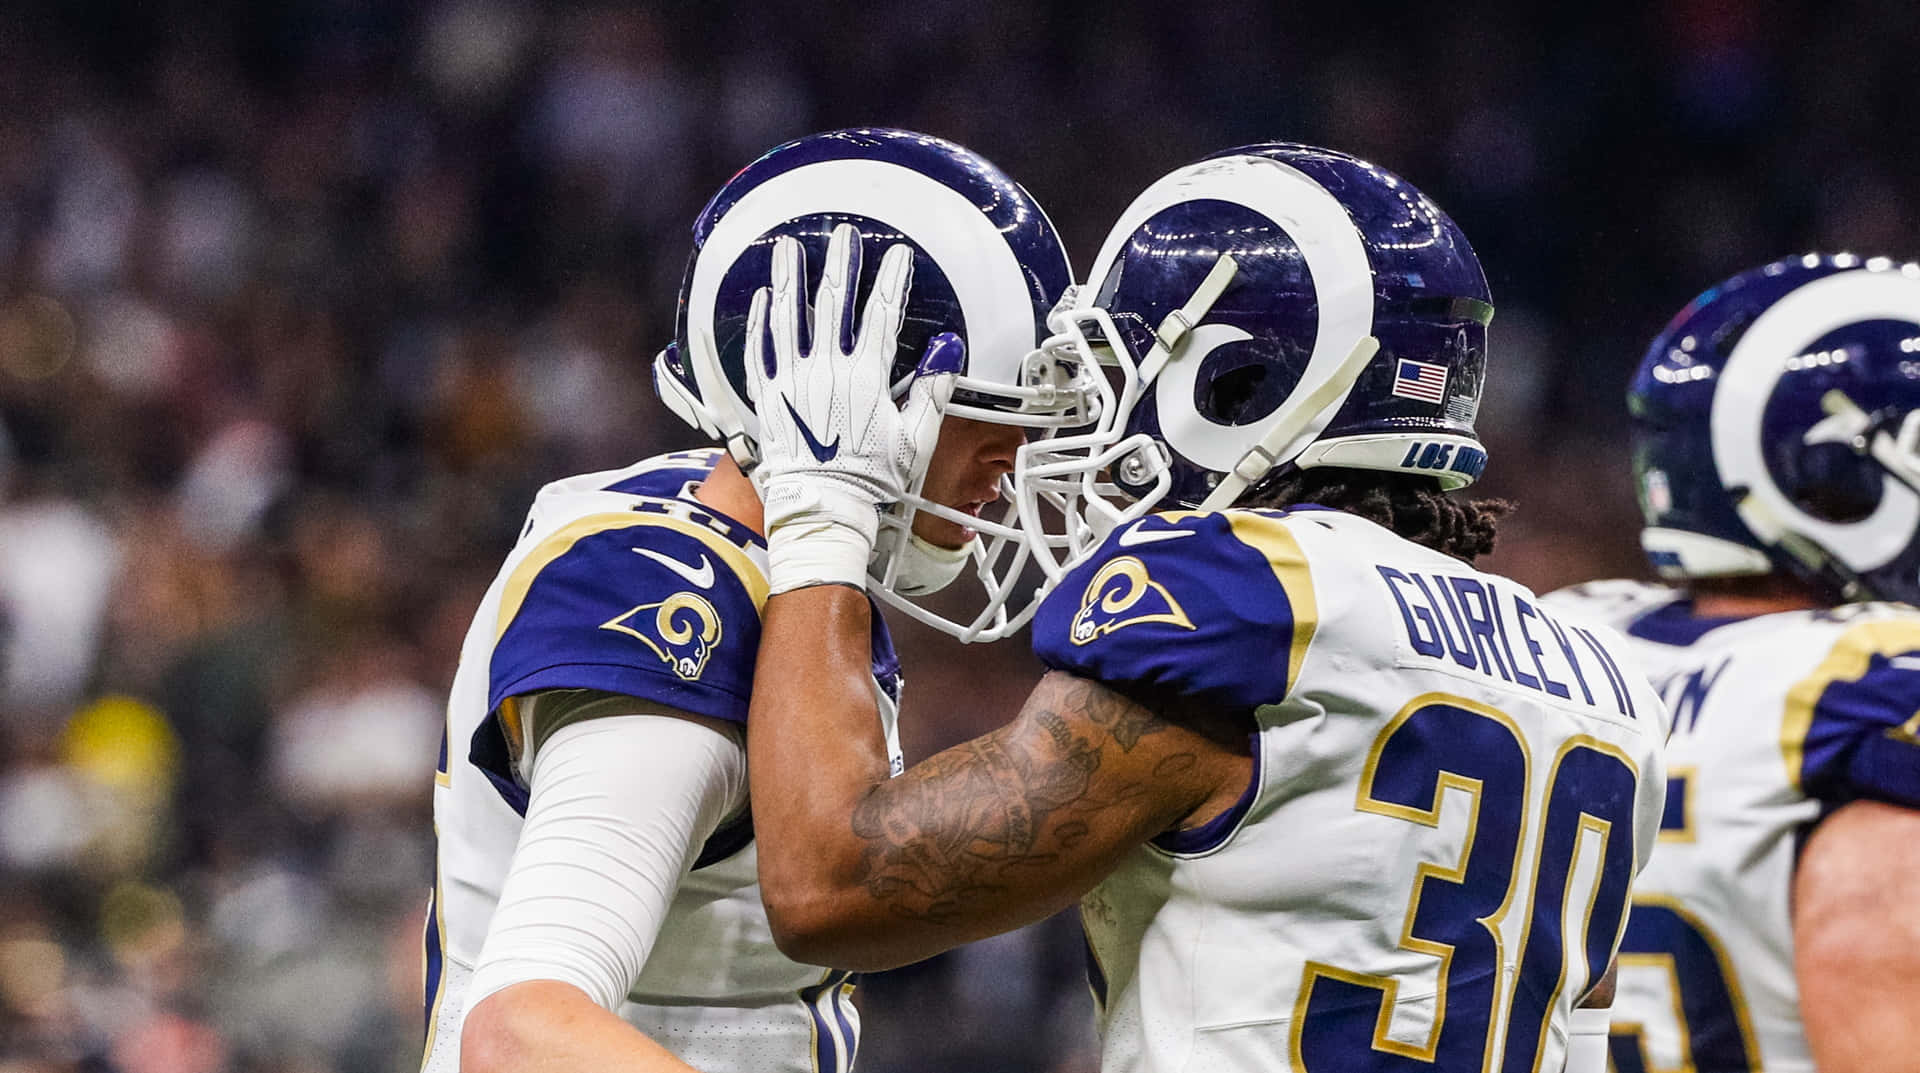 Rams Players Are Congratulating Each Other On The Field Wallpaper